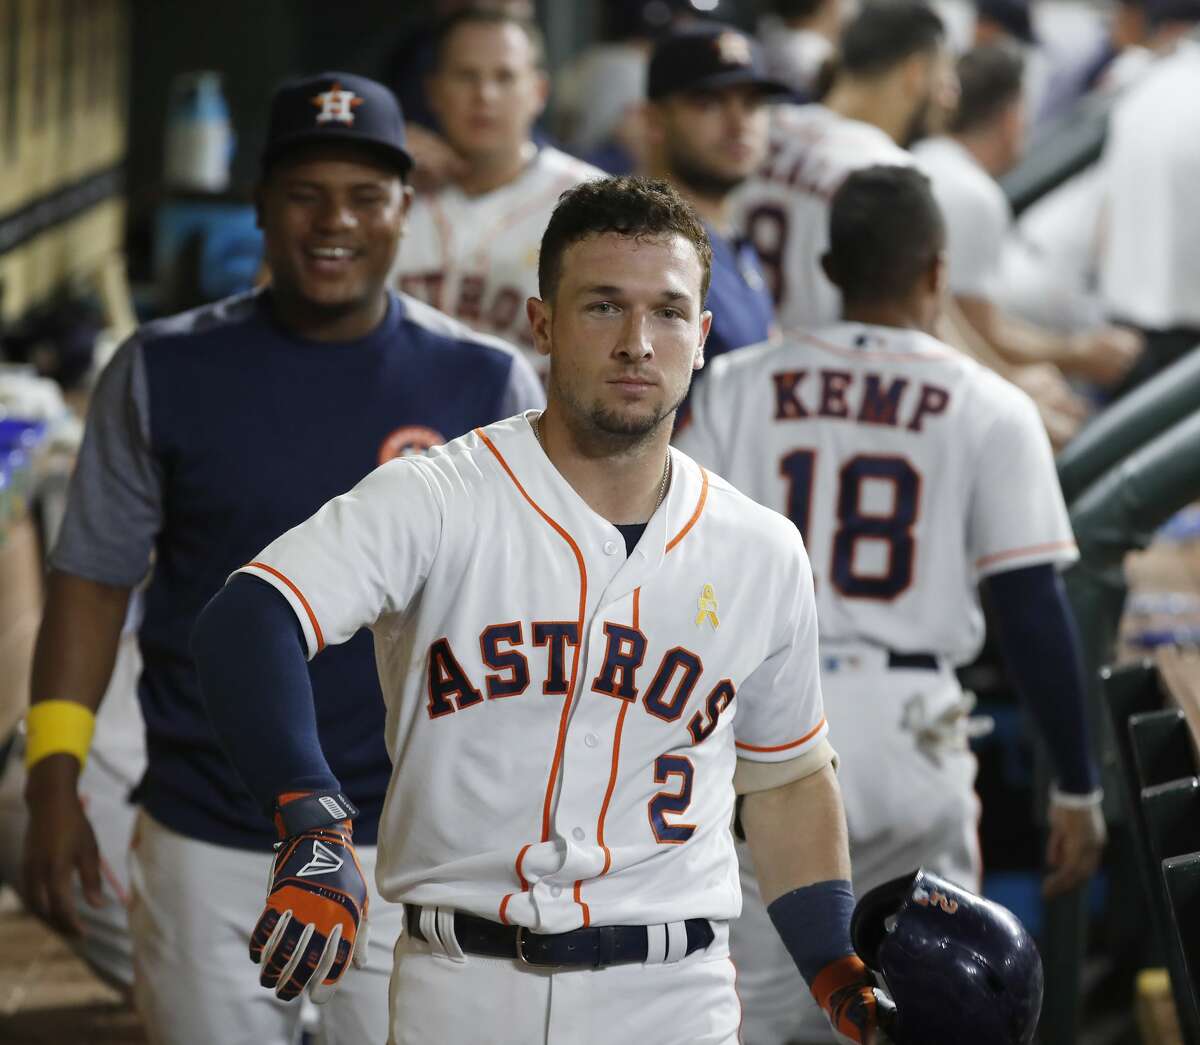 From making the dugout camera stare his calling card to his on-field success, 2018 was quite the memorable season for Alex Bregman.